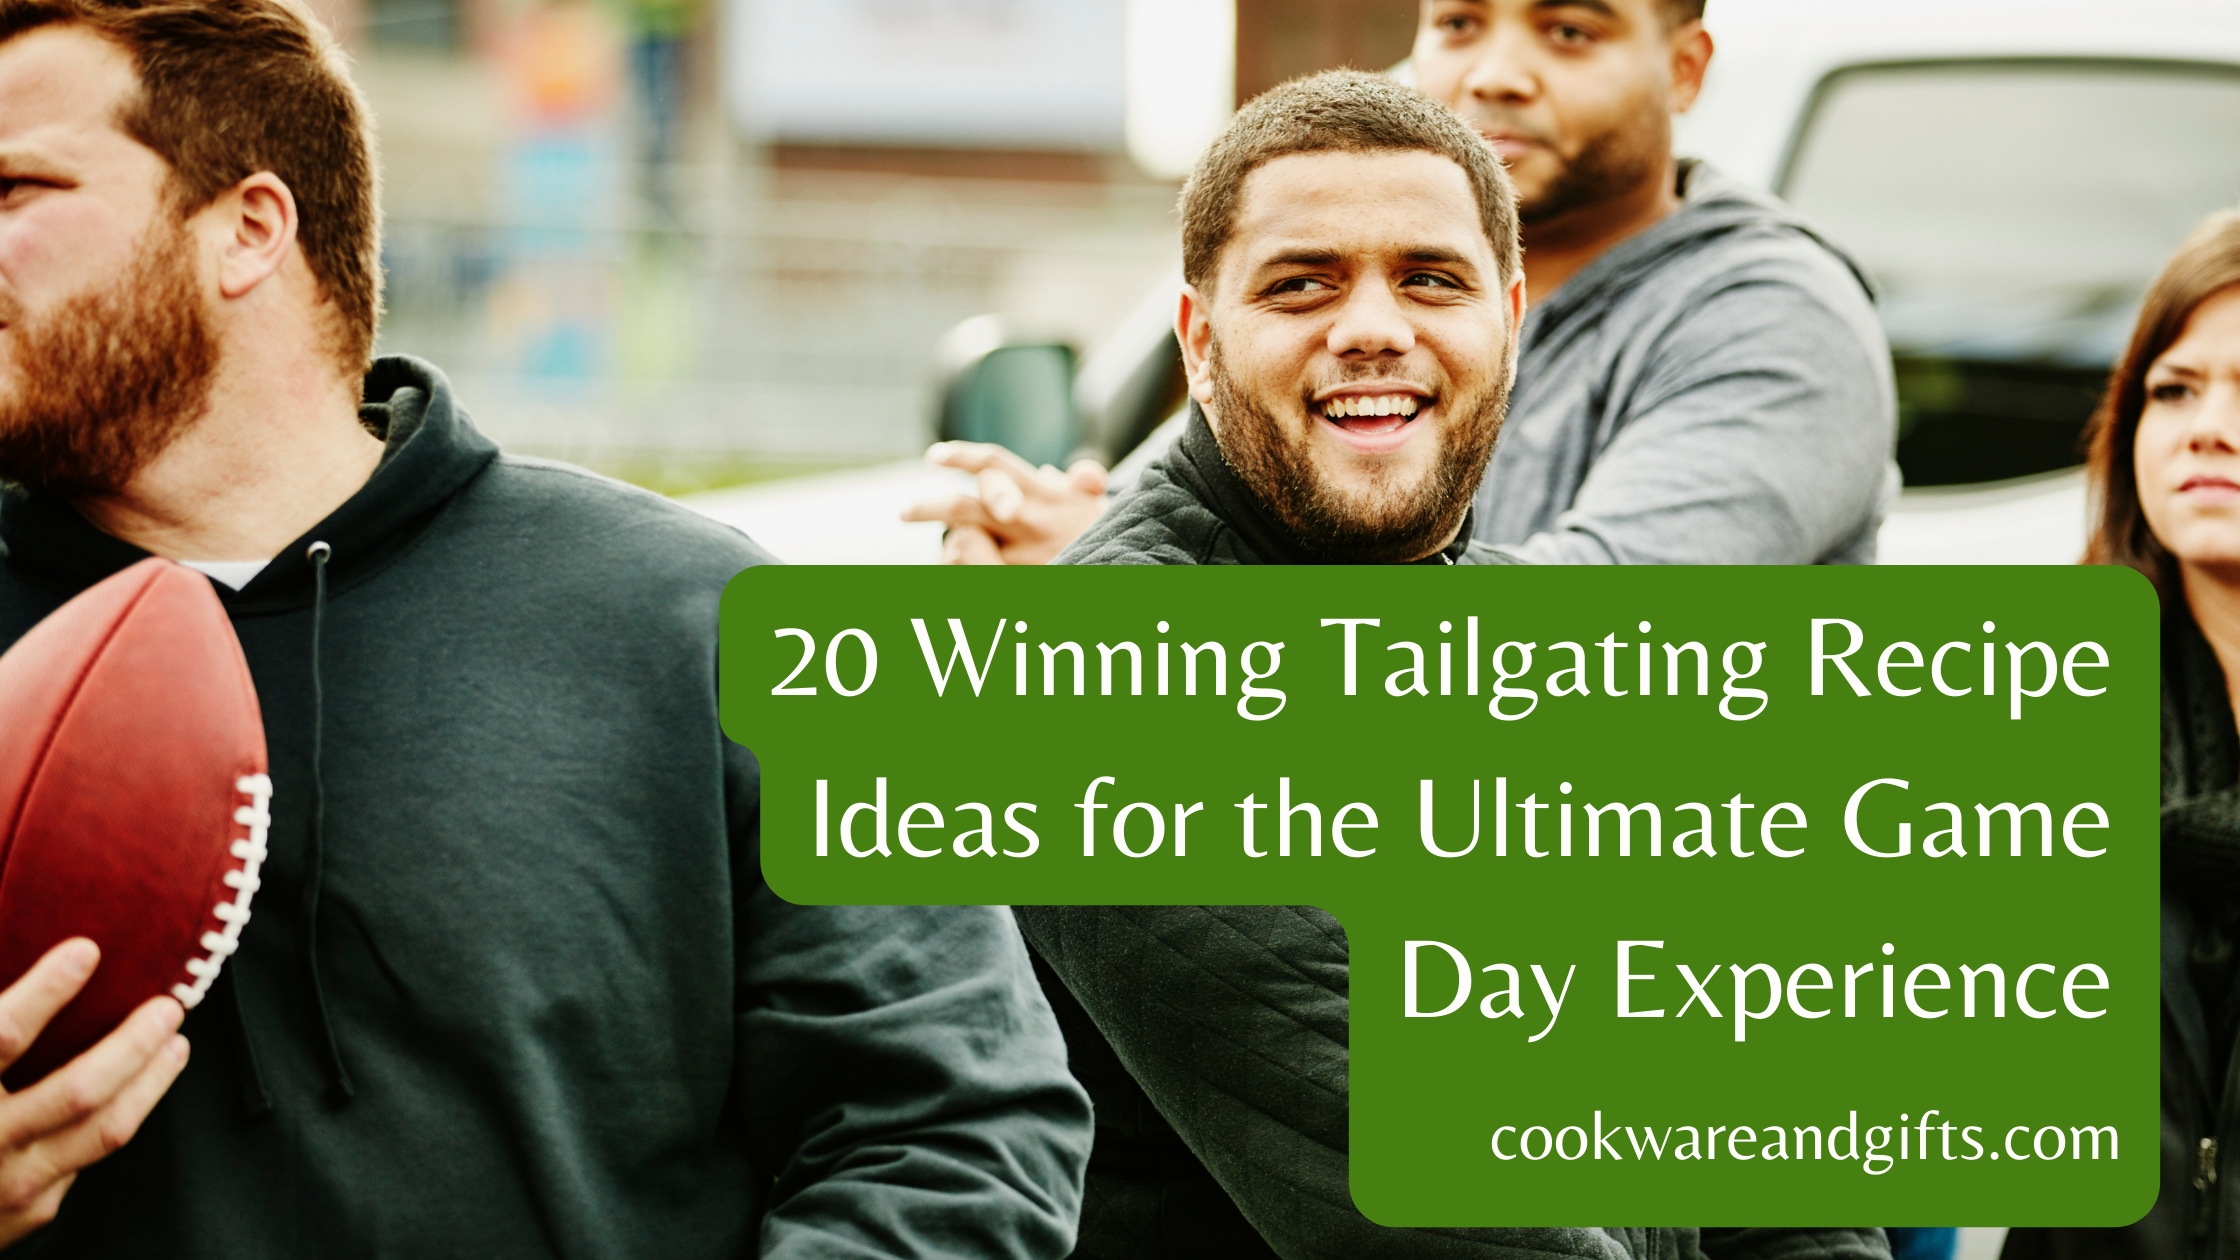 20 Winning Tailgating Recipe Ideas for the Ultimate Game Day Experience